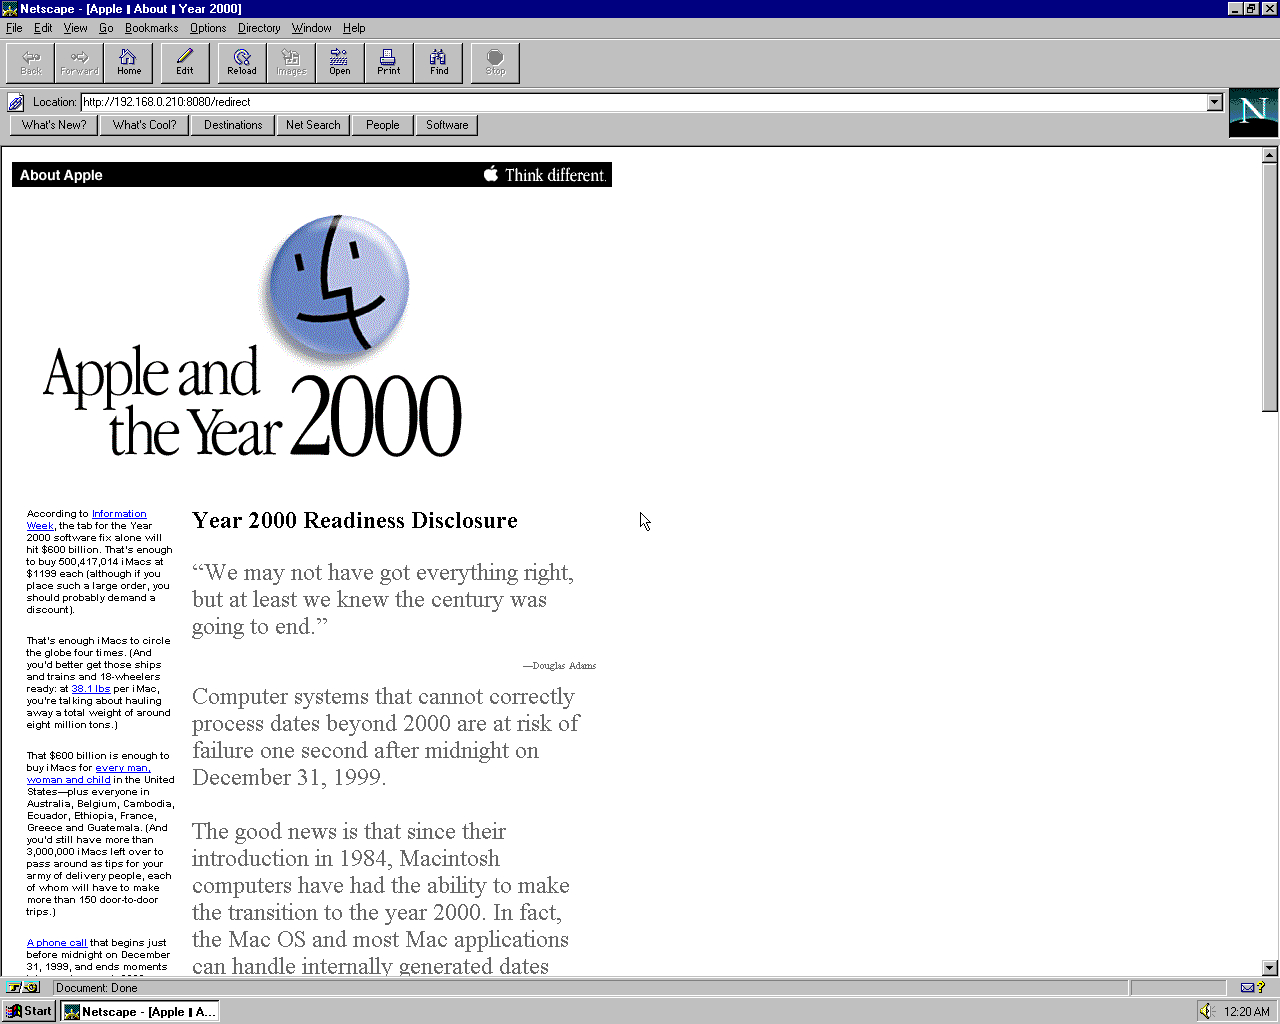 Windows 95 OSR2 x86 with Netscape Navigator 3.0 Gold displaying a page from Apple.com archived at March 01, 2000 at 02:58:35